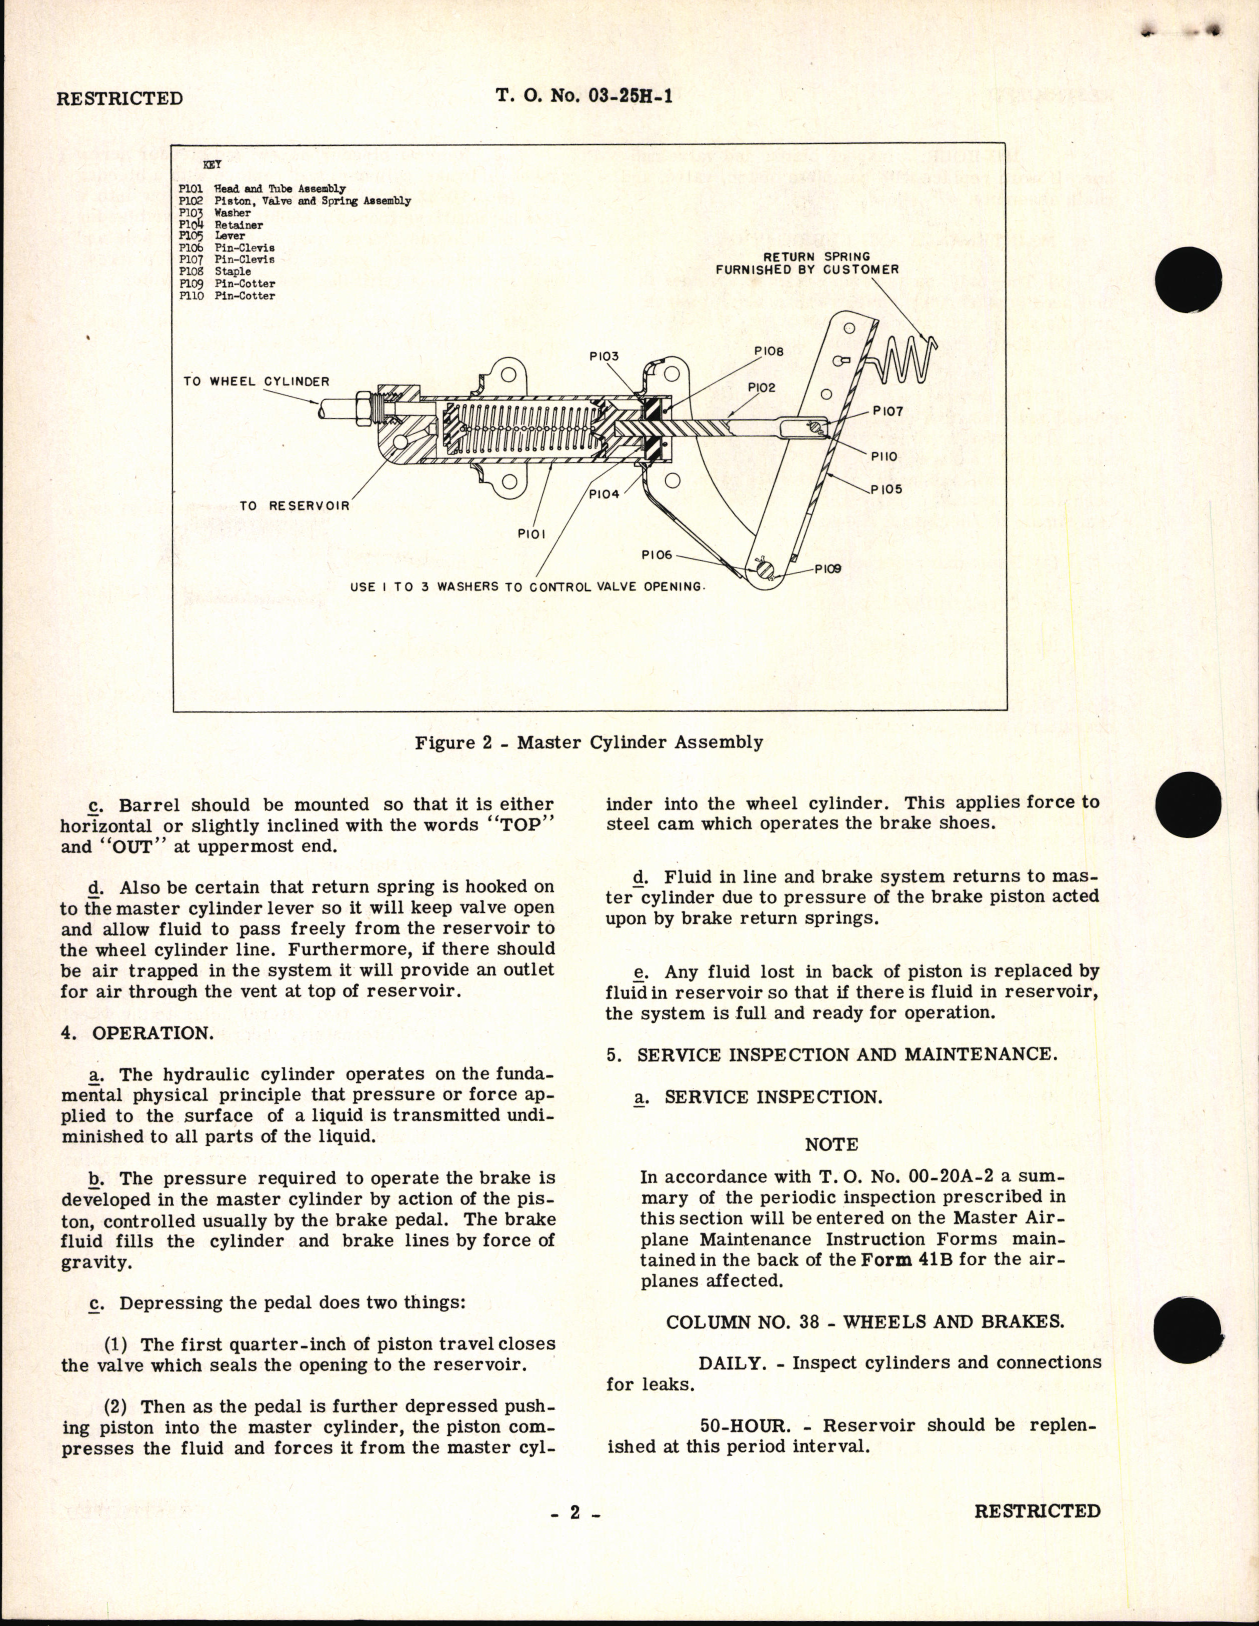 Sample page 6 from AirCorps Library document: Handbook of Instructions with Parts Catalog for Model MC100 Hydraulic Master Cylinder